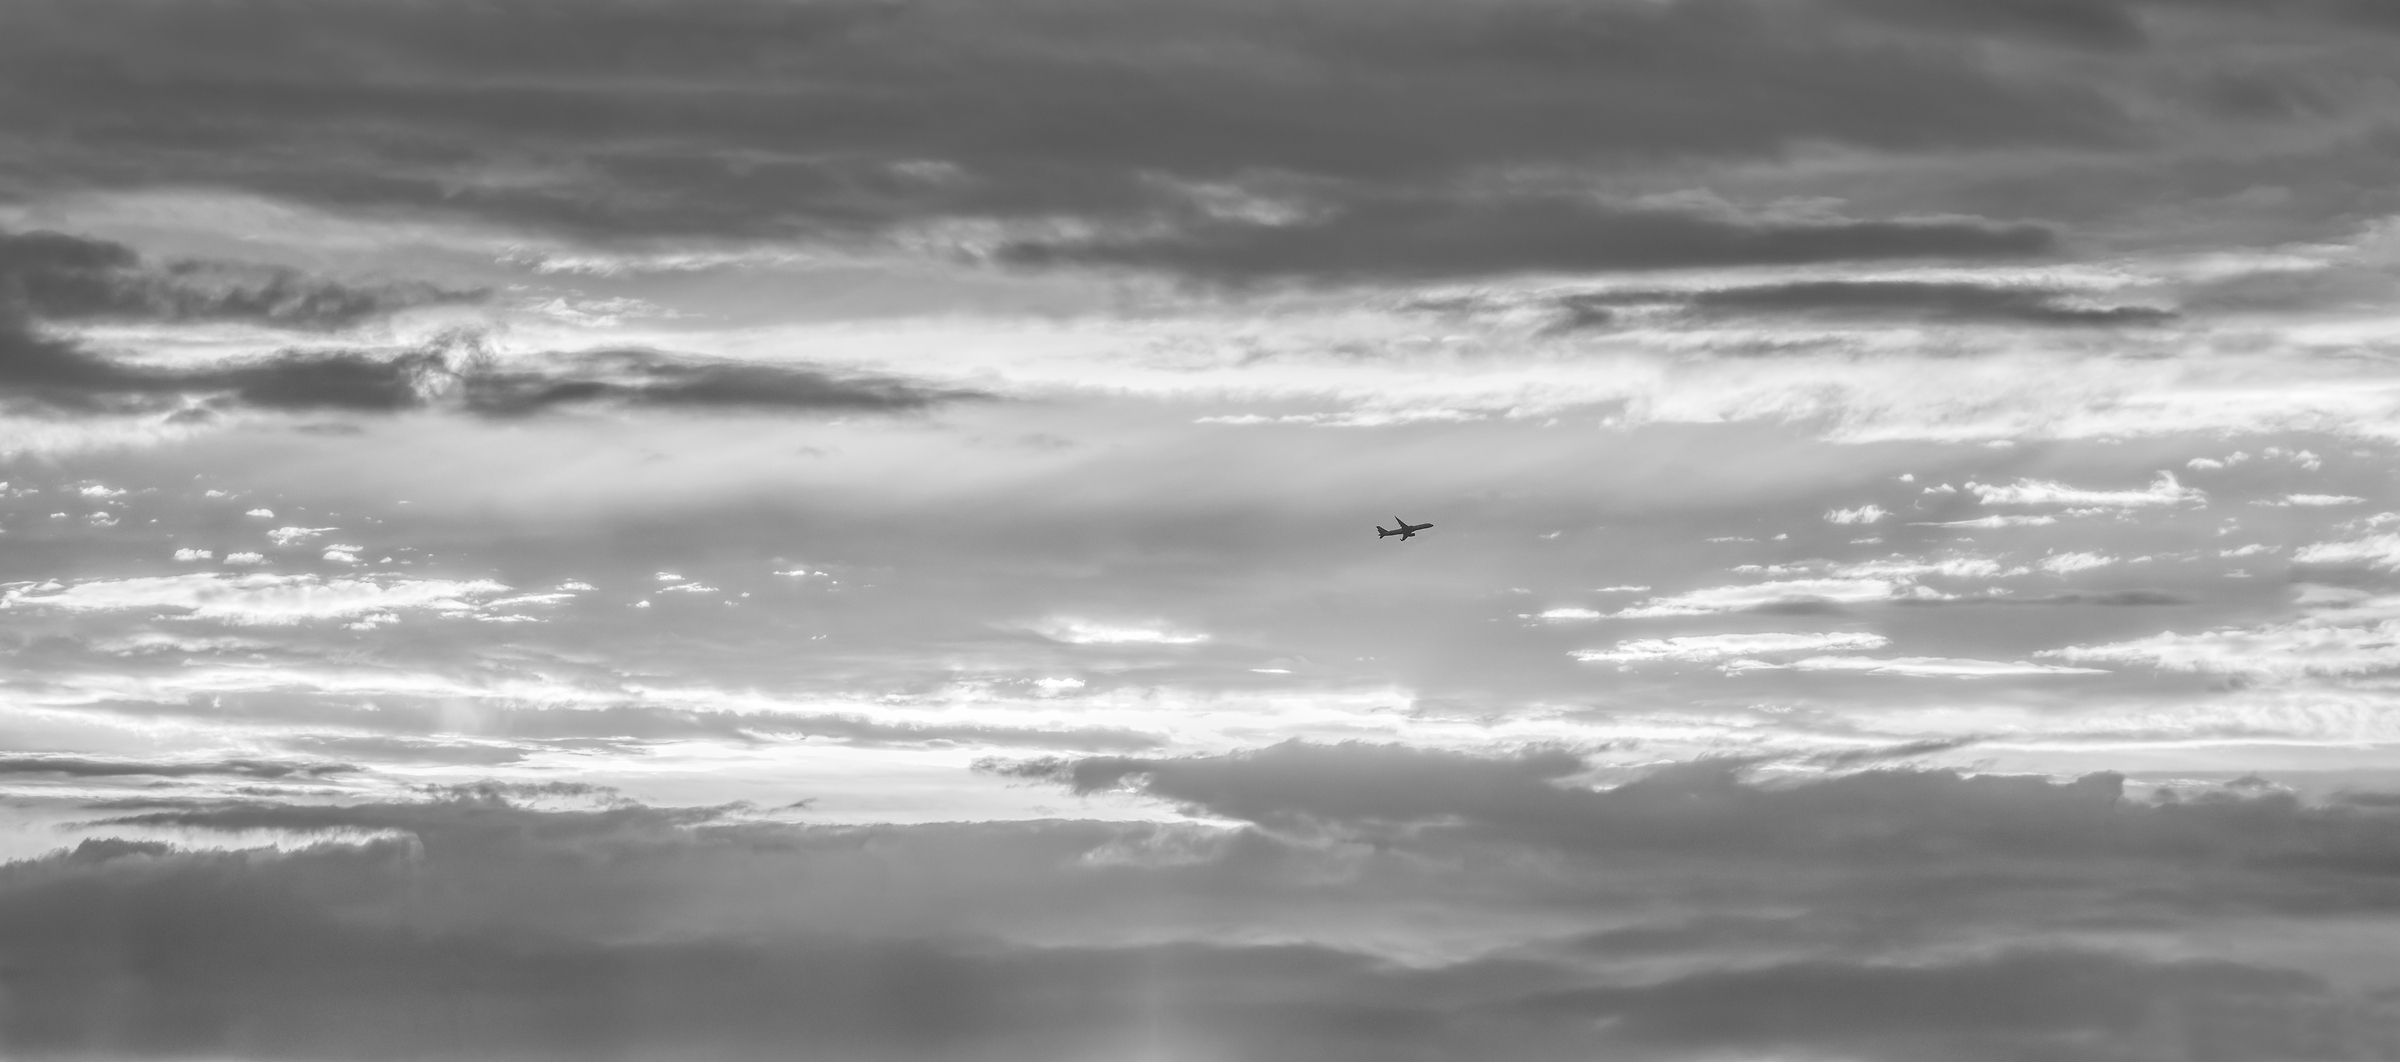 328 megapixels! A very high resolution, black & white VAST photo print of a plane with a sunset behind it; fine art photograph created by Dan Piech in New York City.